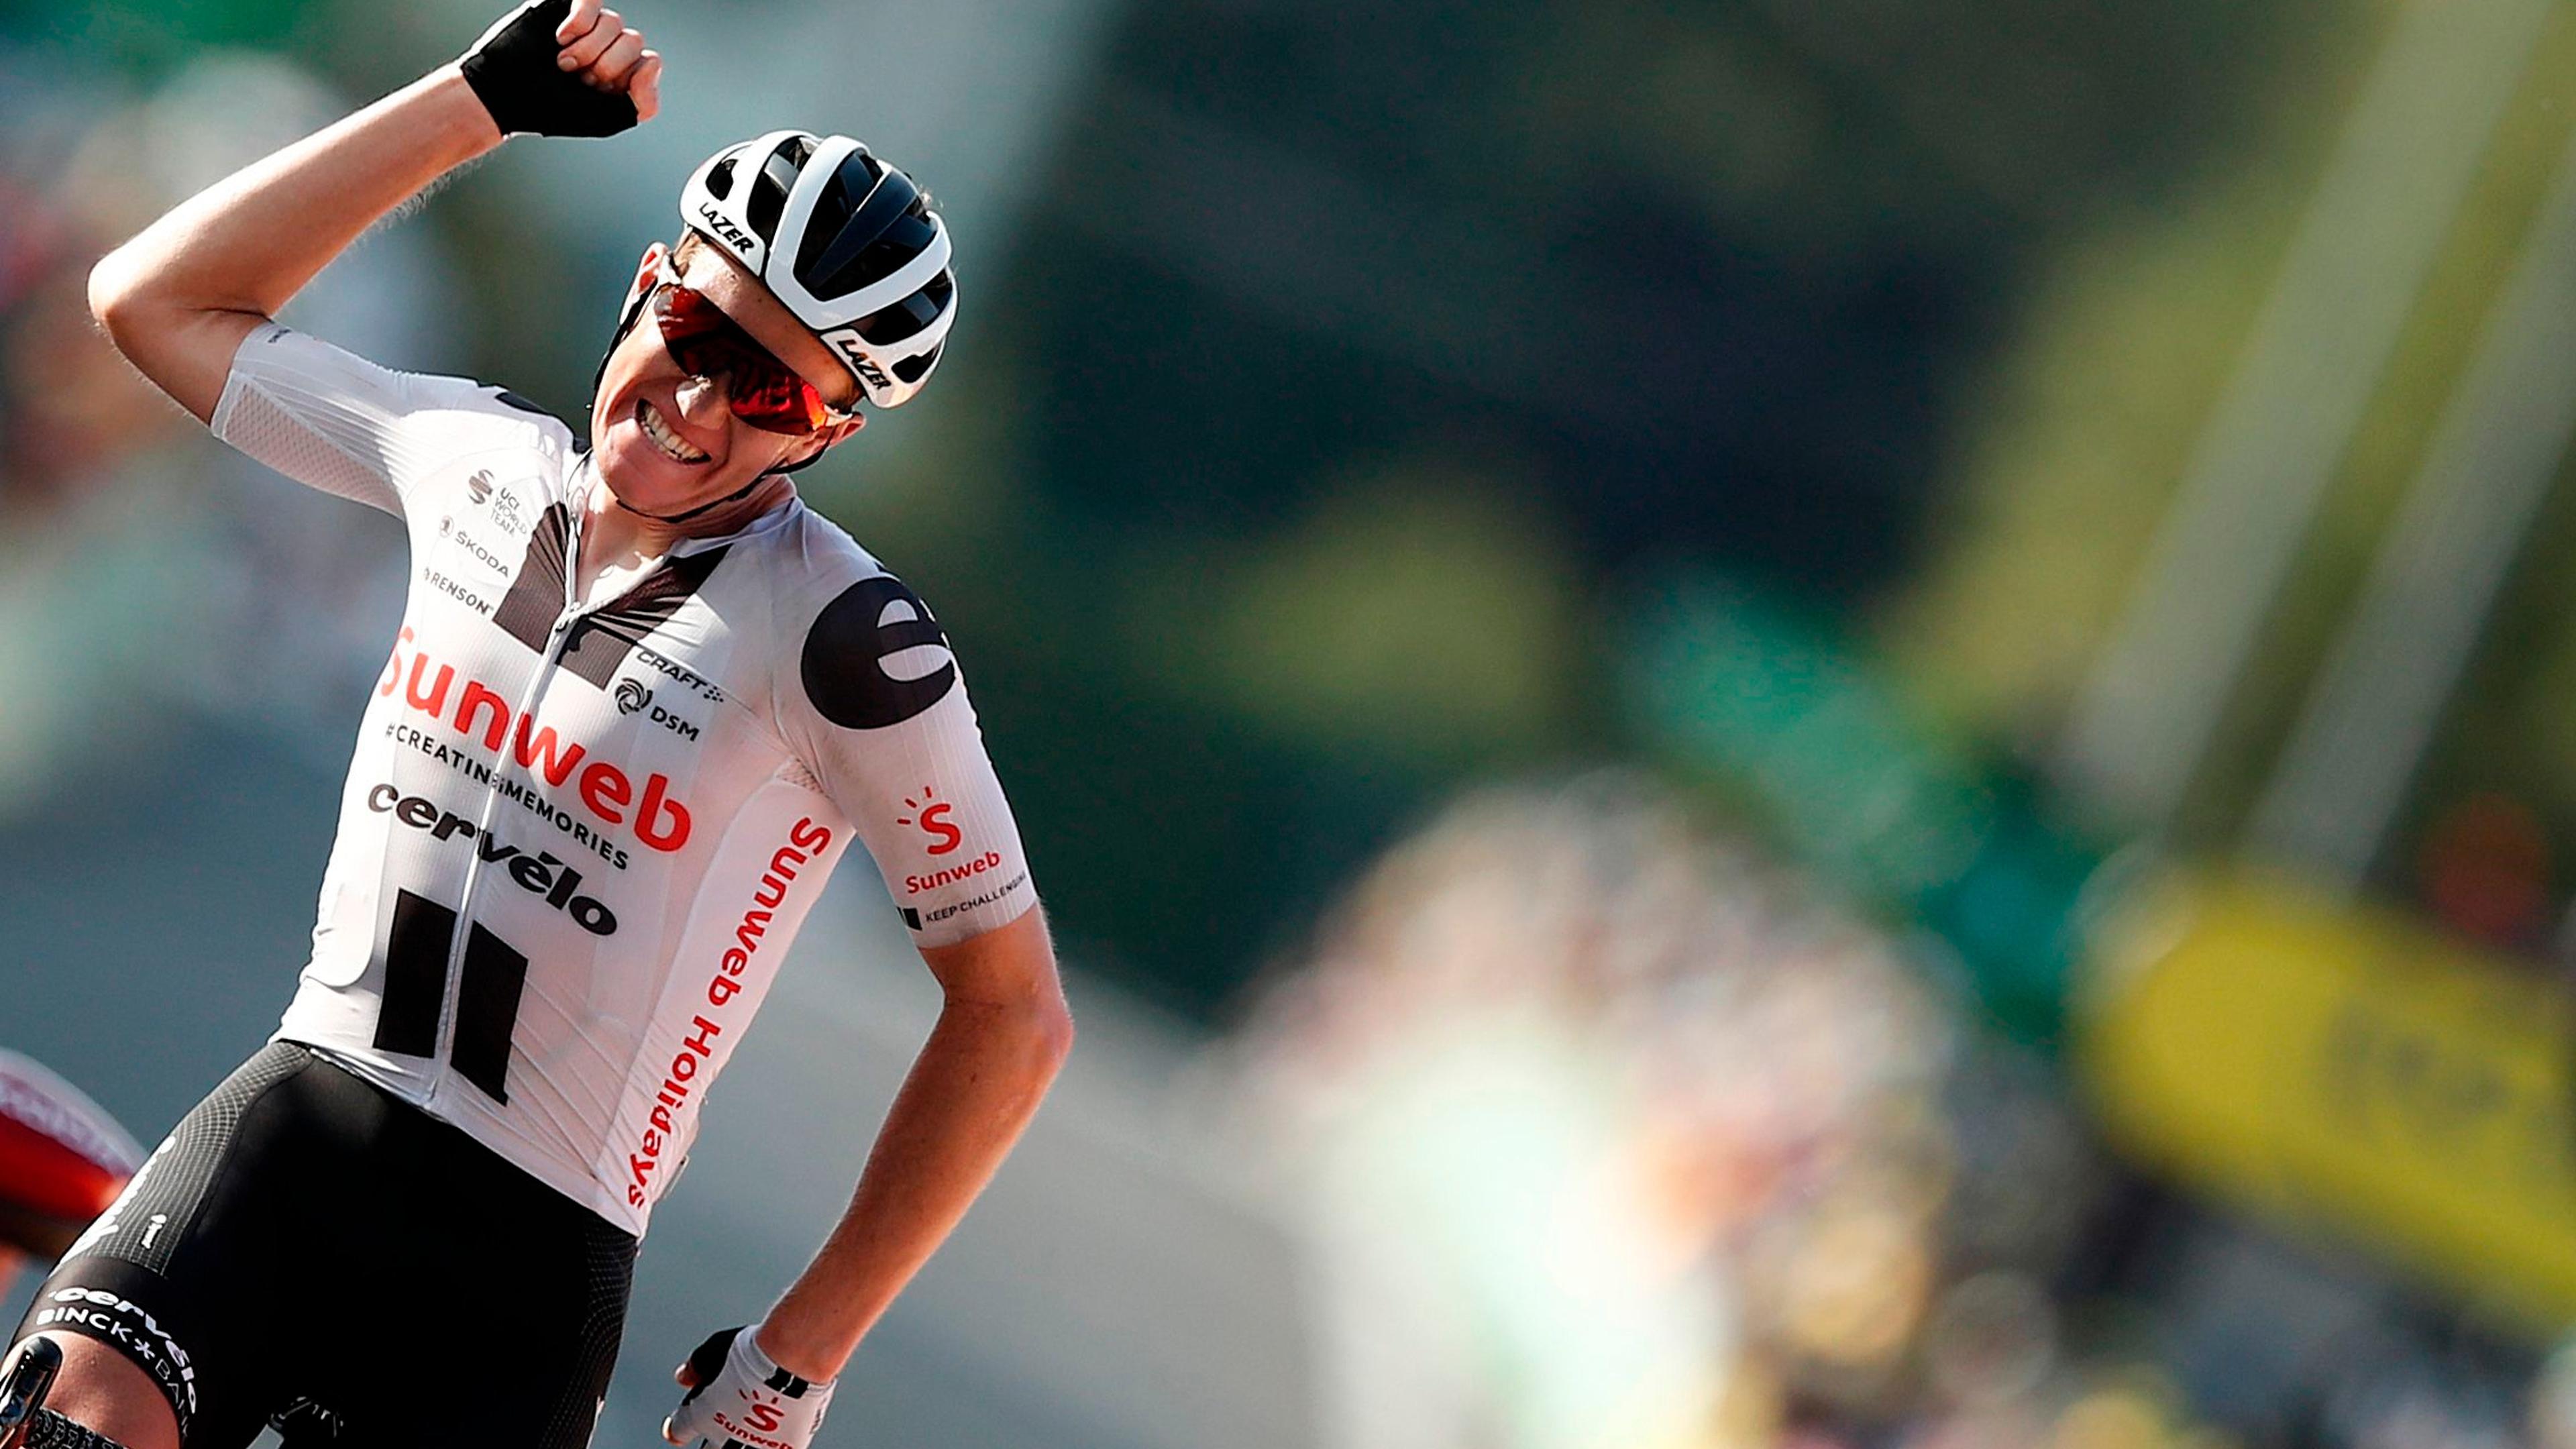 Stage winner Team Sunweb rider Denmark's Soren Kragh Andersen celebrates as he crosses the finish line at the end of the 19th stage of the 107th edition of the Tour de France cycling race, 160 km between Bourg-en-Bresse and Champagnole, on September 18, 2020. (Photo by BENOIT TESSIER / various sources / AFP)